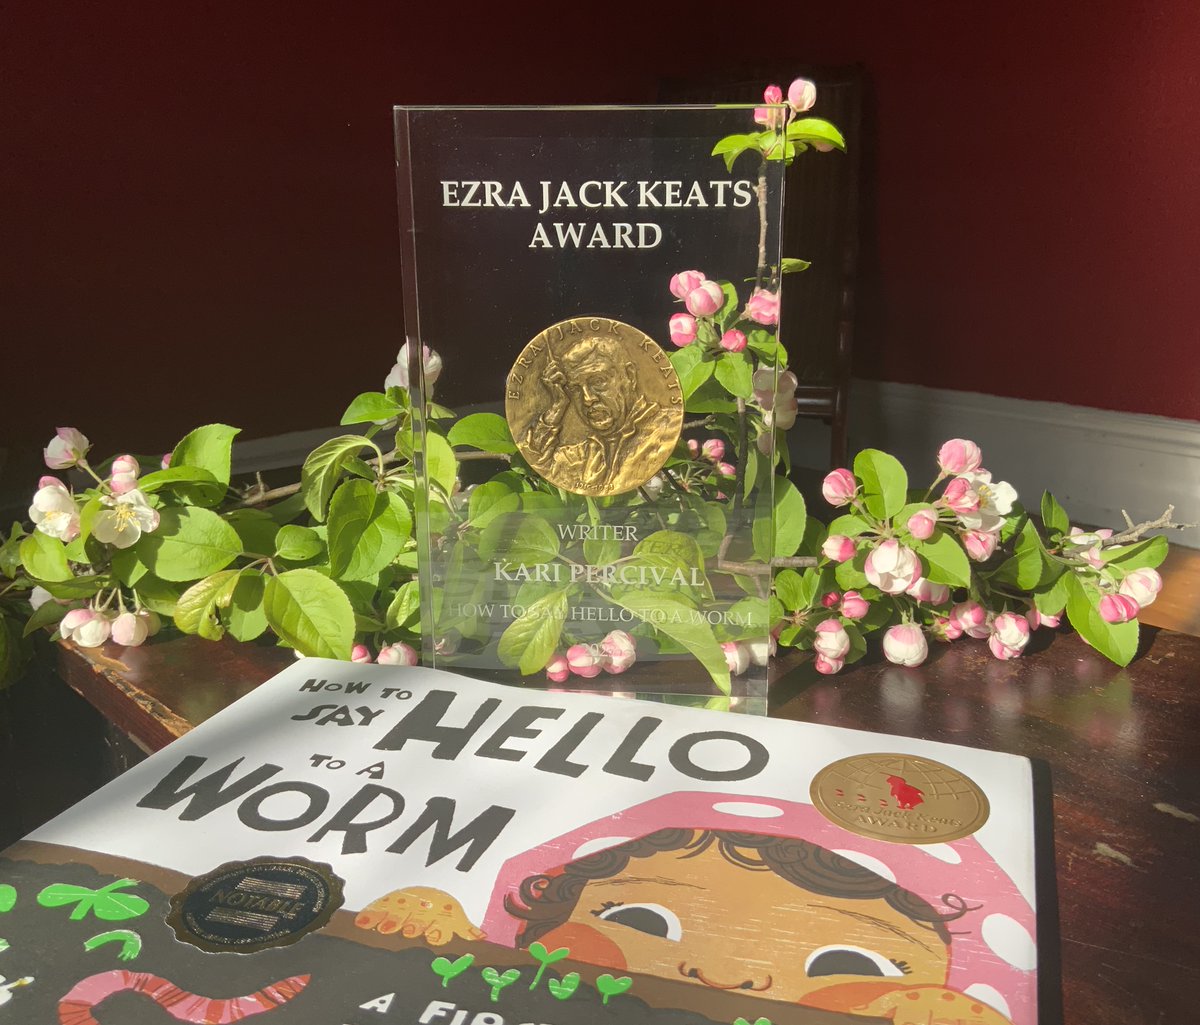 Boston area friends, you're invited! Join me at the Malden Public Library, 7 PM, Thursday May 11, to celebrate bringing the Ezra Jack Keats Award home! Slide show and reception. @MaldenMAlibrary @EJKeats @degrummond @WorkshopBooks #kidlit #nescbwi #scbwi #authortalk @teresakie